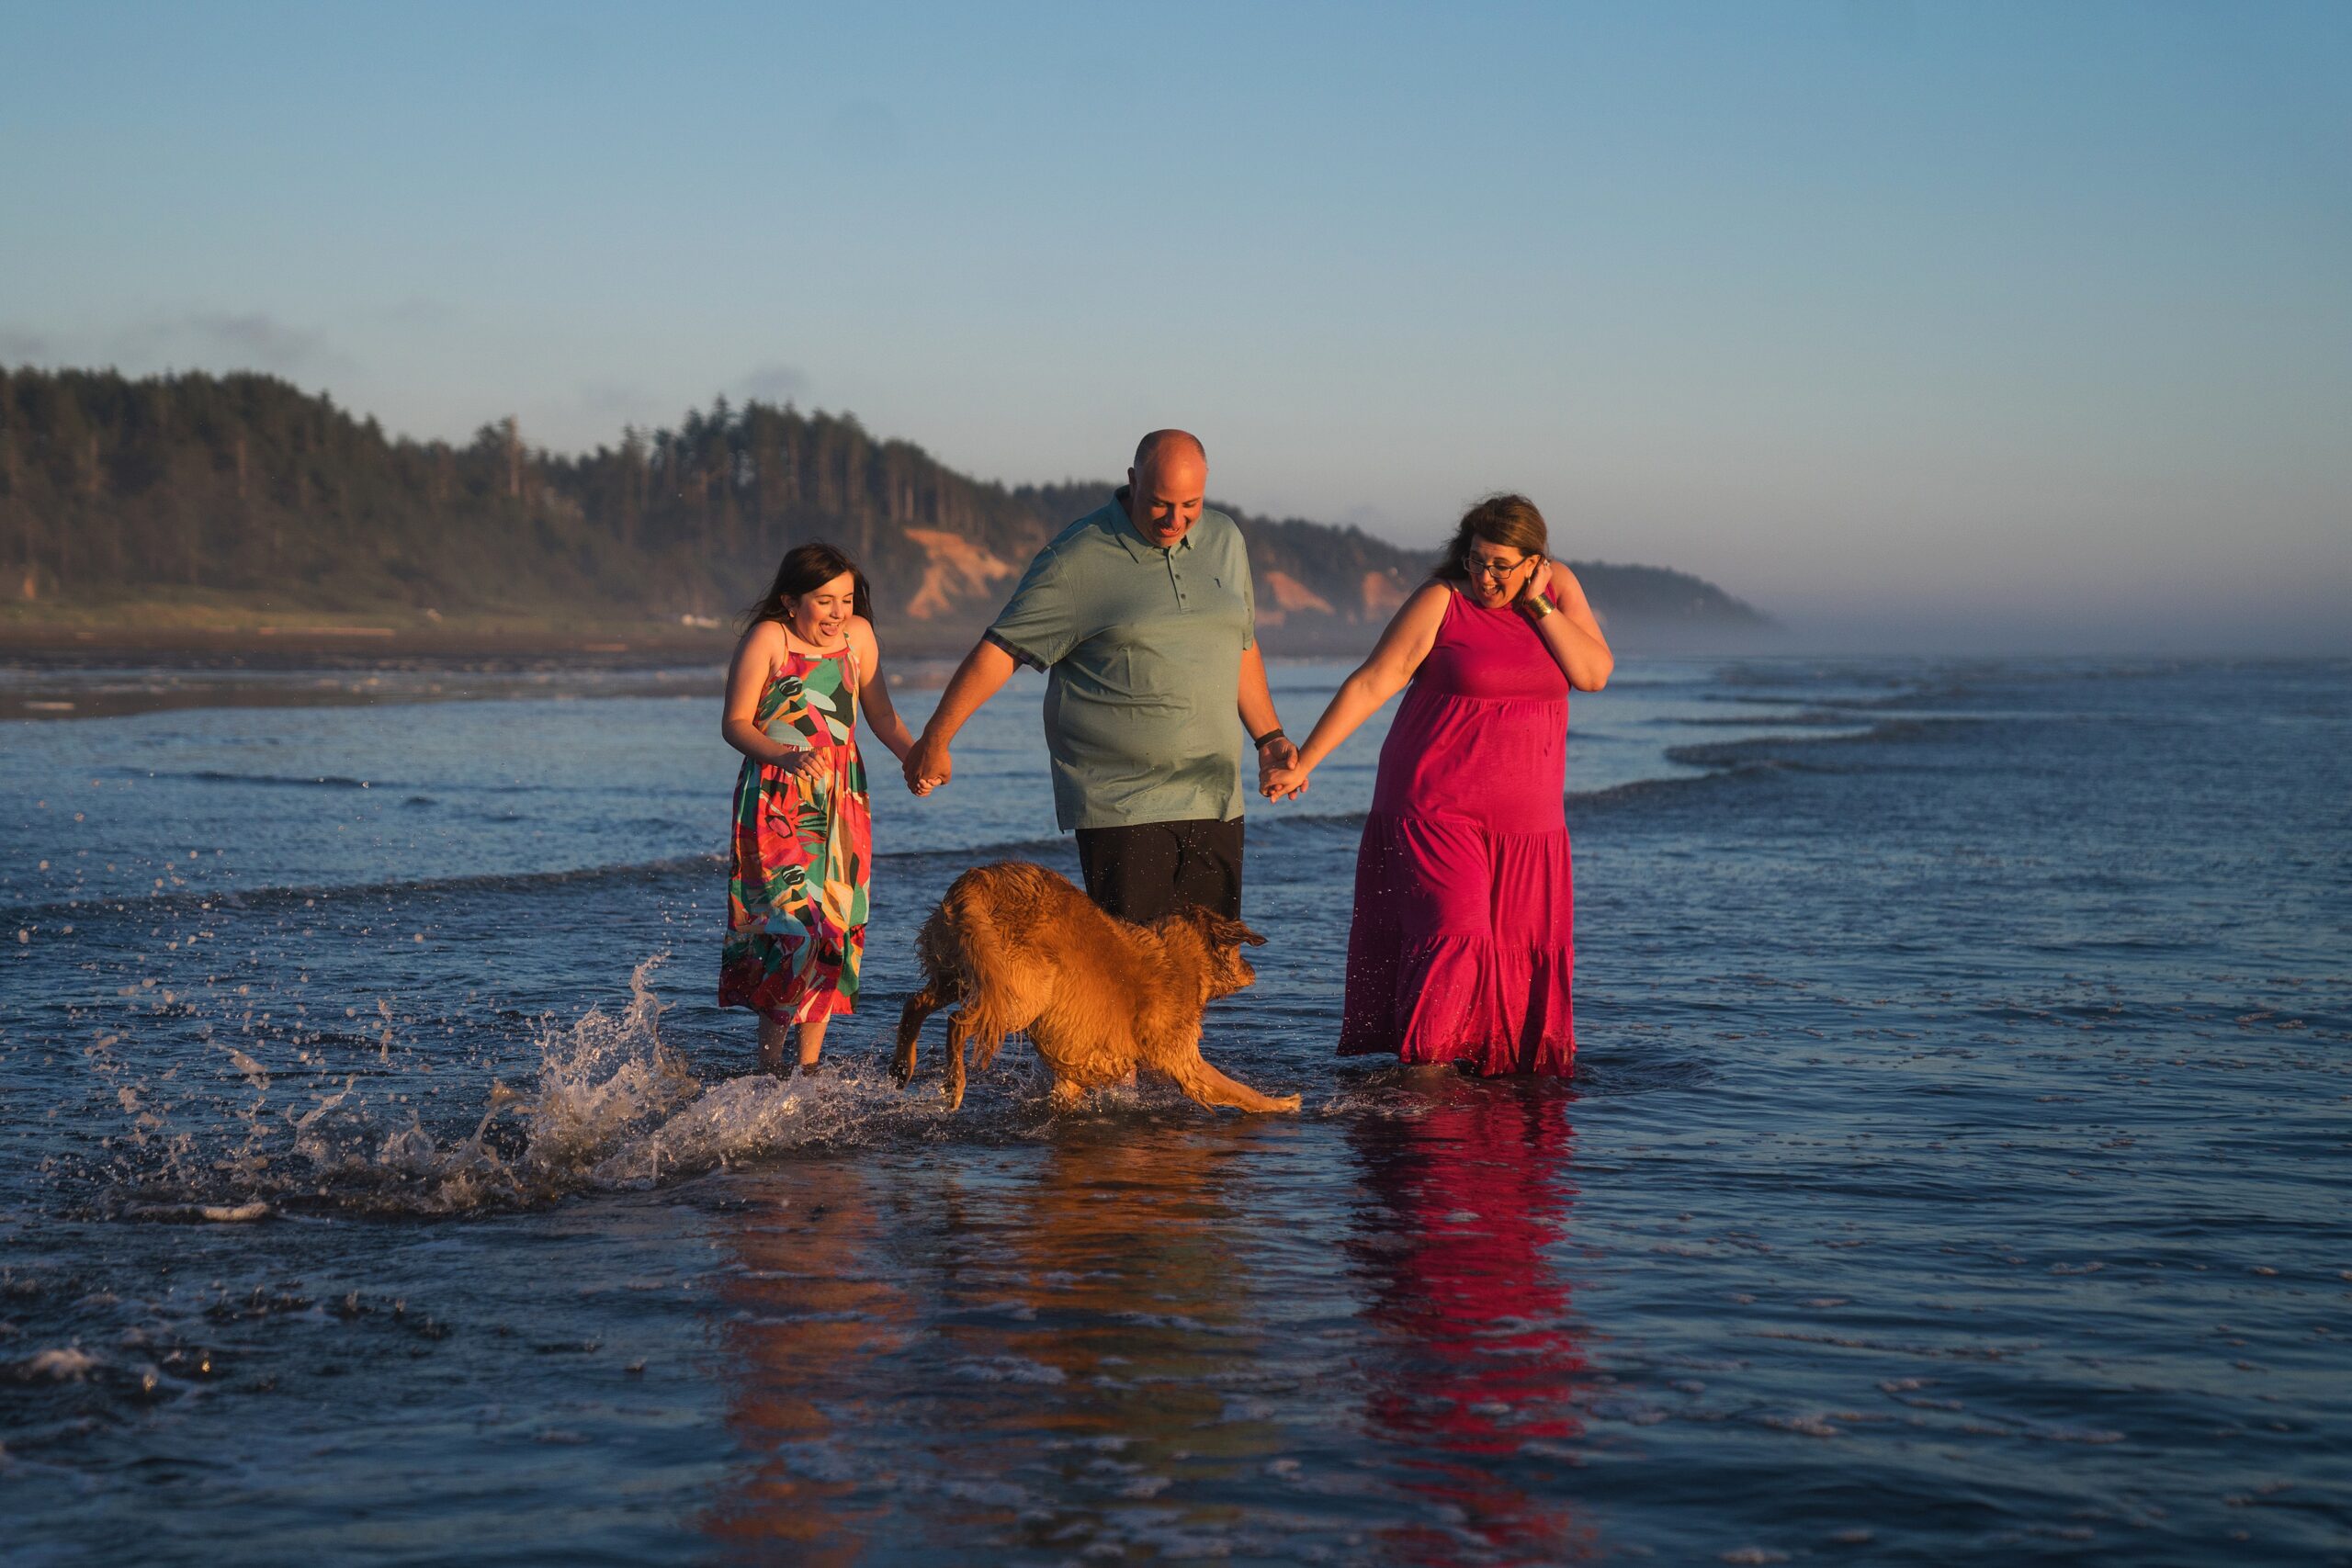 Beach family photo outfit ideas with bright colors at Seabrook, WA